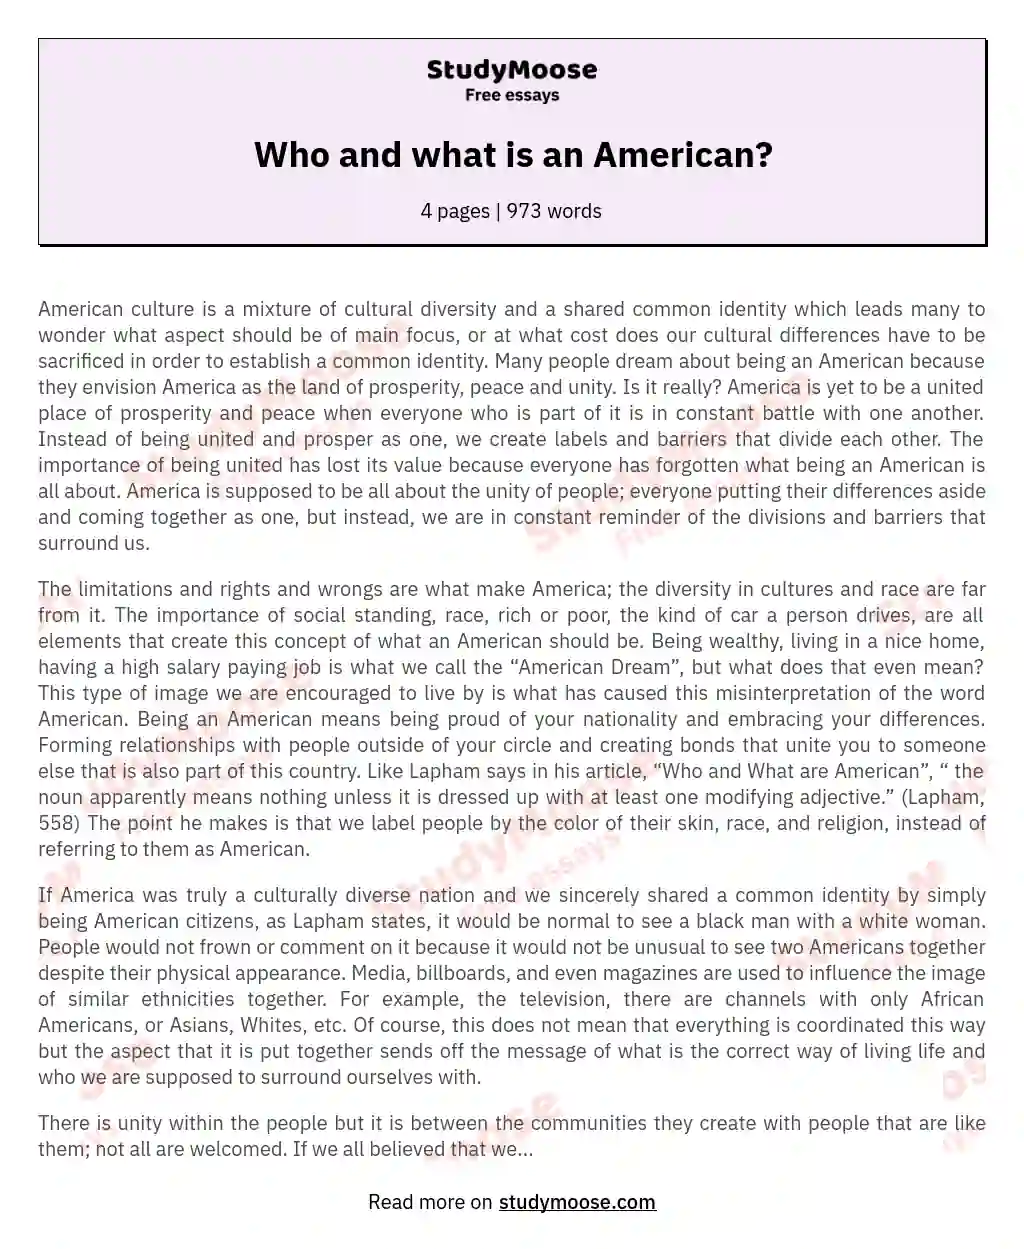 Who and what is an American? essay